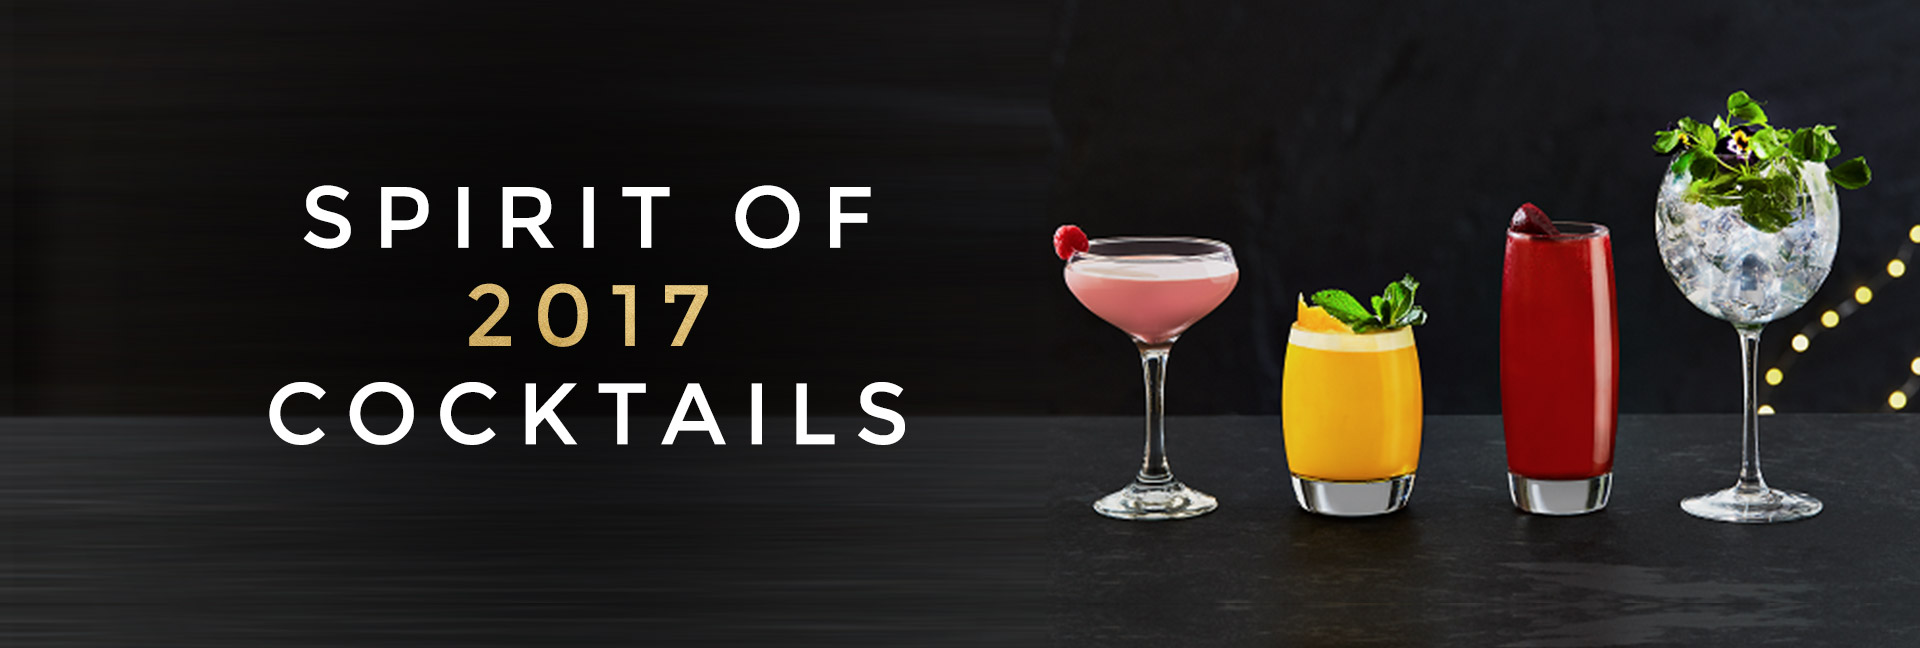 Spirit of 2017 cocktails at All Bar One Liverpool